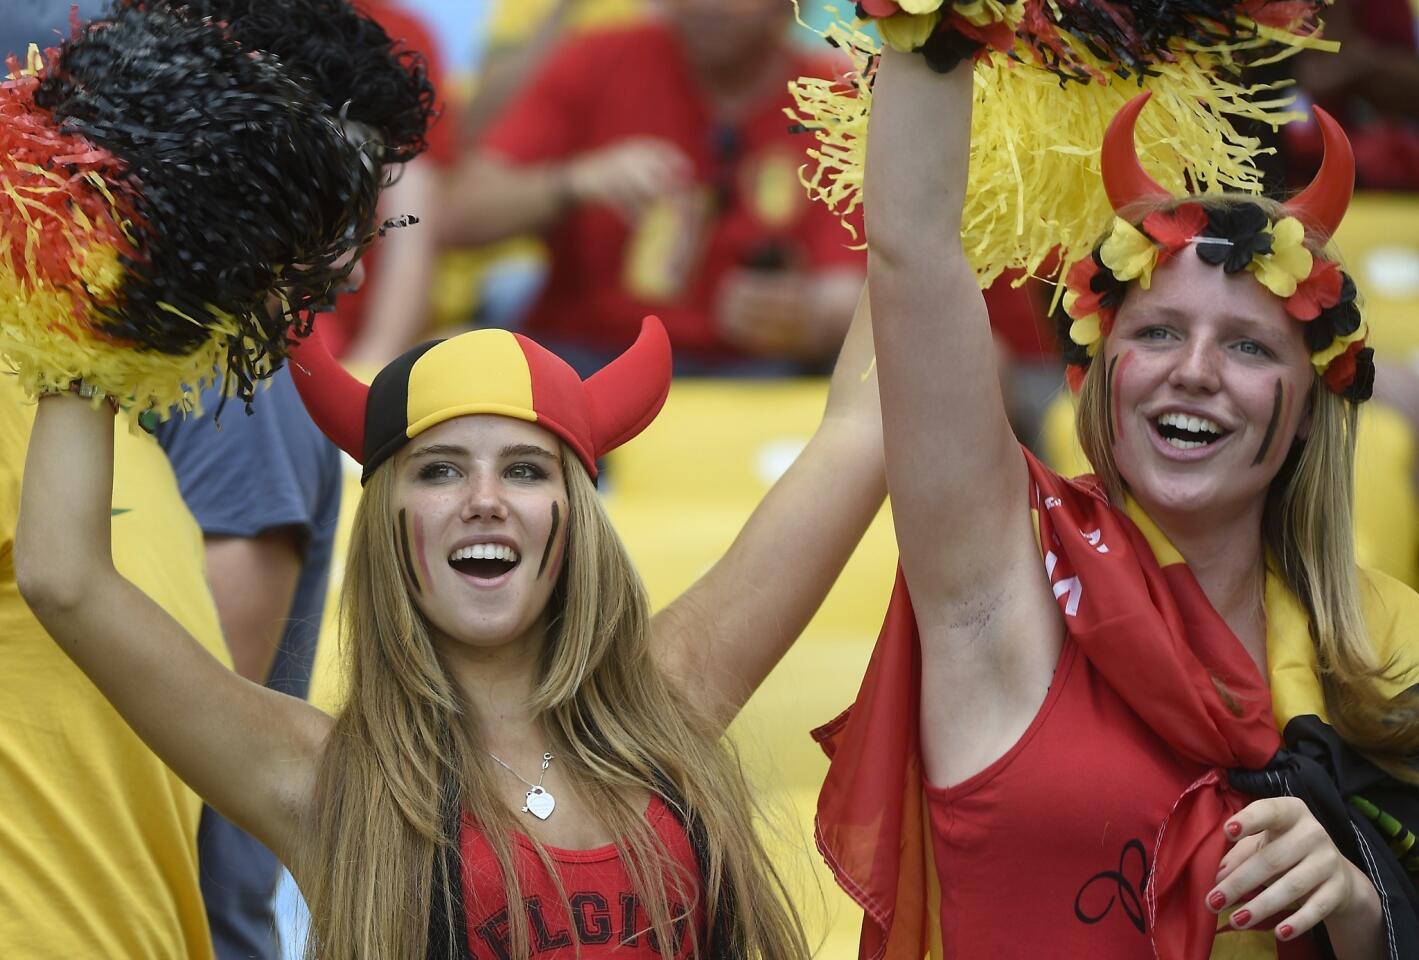 Axelle Despiegelaere, a Belgium supporter cheers with her friend as they wait for the start of the Group H football match between Belgium and Russia at the Maracana Stadium in Rio de Janeiro during the 2014 FIFA World Cup on June 22, 2014. AFP PHOTO / MARTIN BUREAU (Photo credit should read MARTIN BUREAU/AFP/Getty Images)